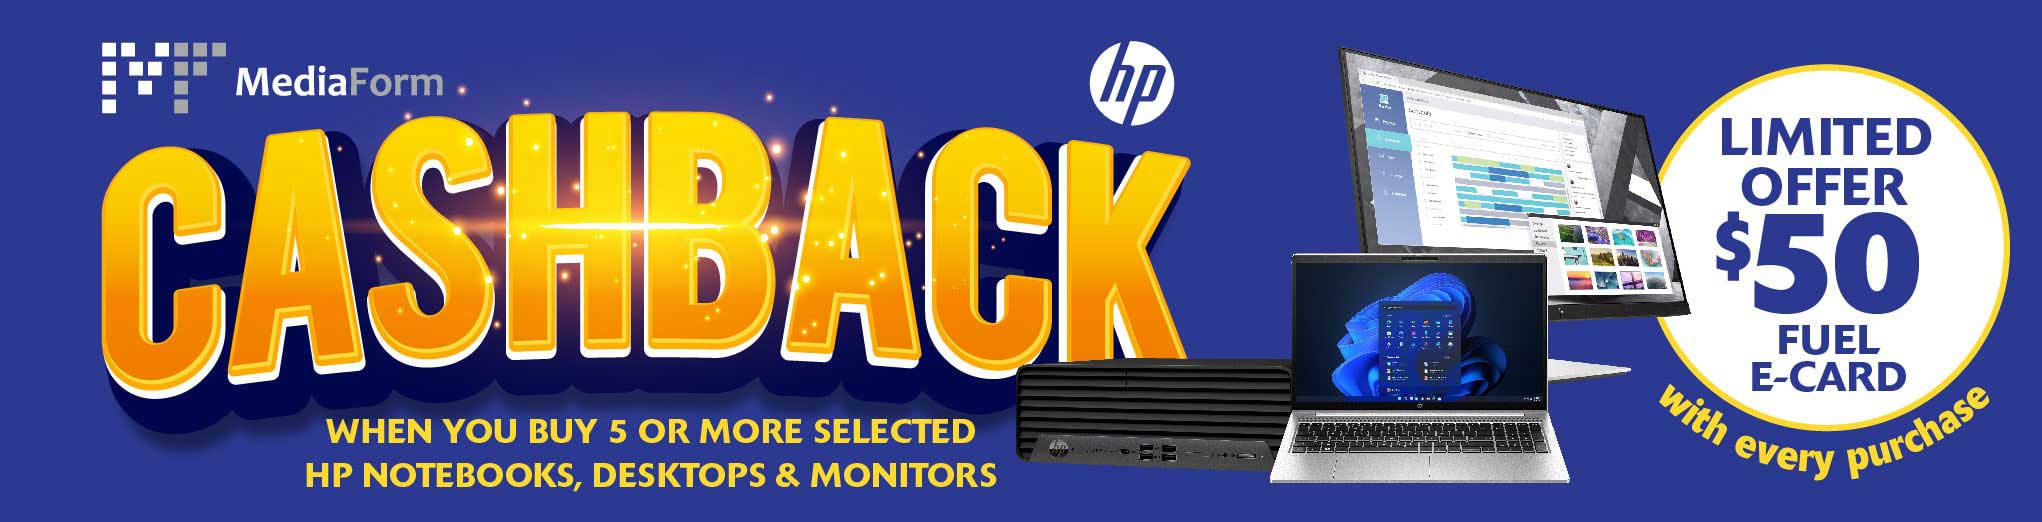 3% Cash Back on selected HP Hardware when you buy 5 or more